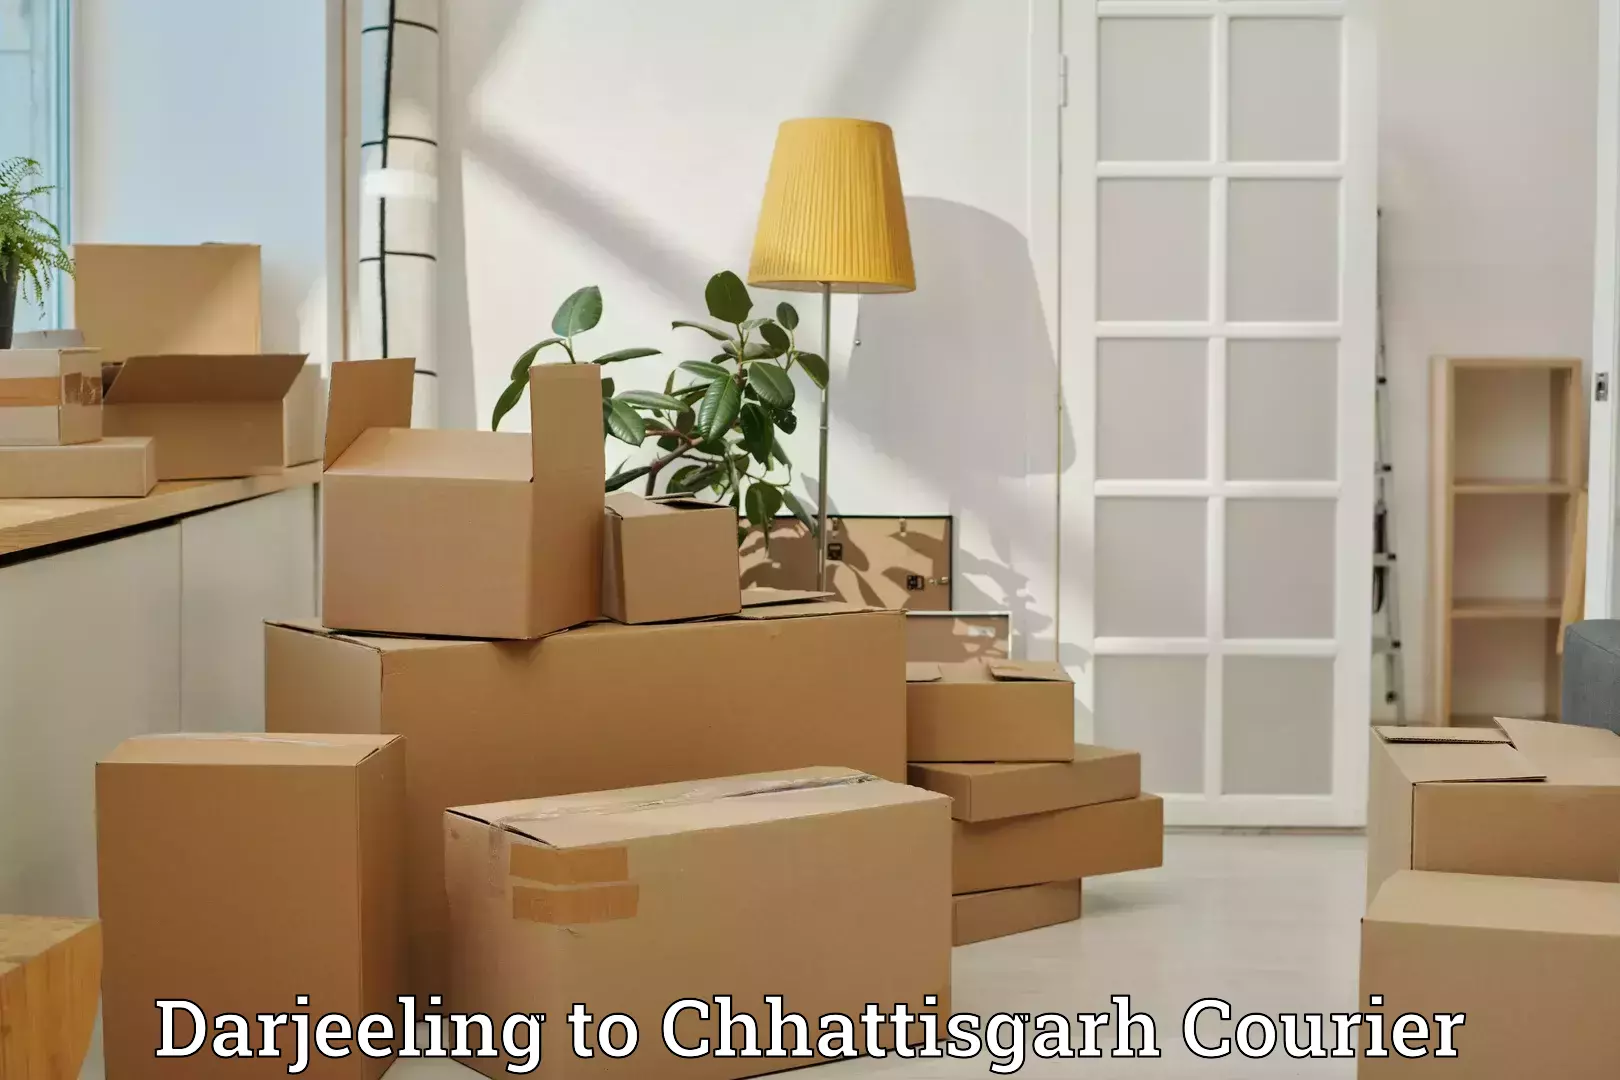 Luggage delivery providers Darjeeling to Raigarh